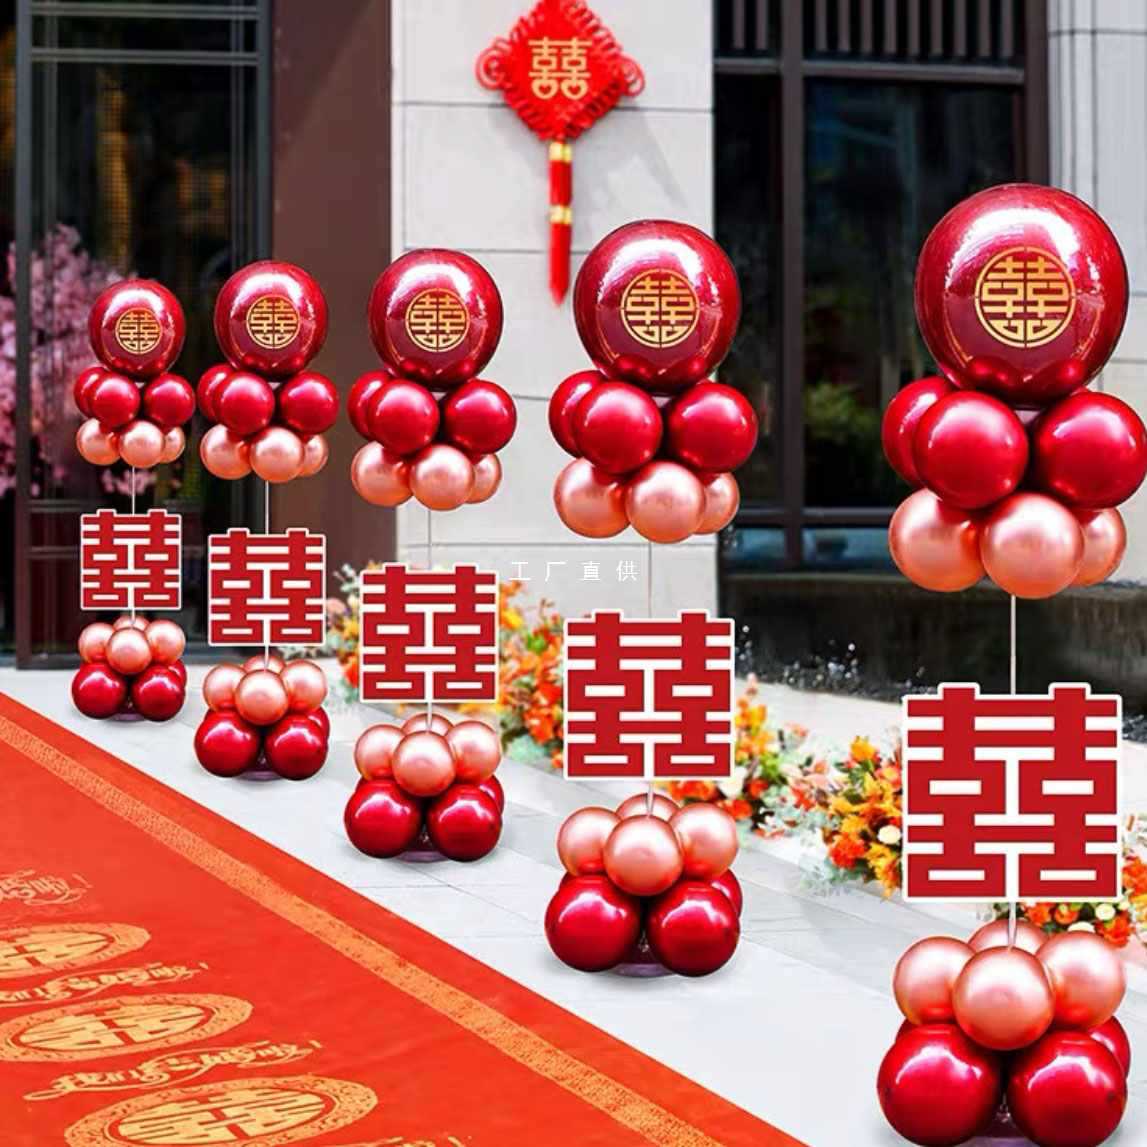 wedding chinese character xi kt board arch decoration wedding road balloon column rural outdoor community welcome wedding ceremony layout